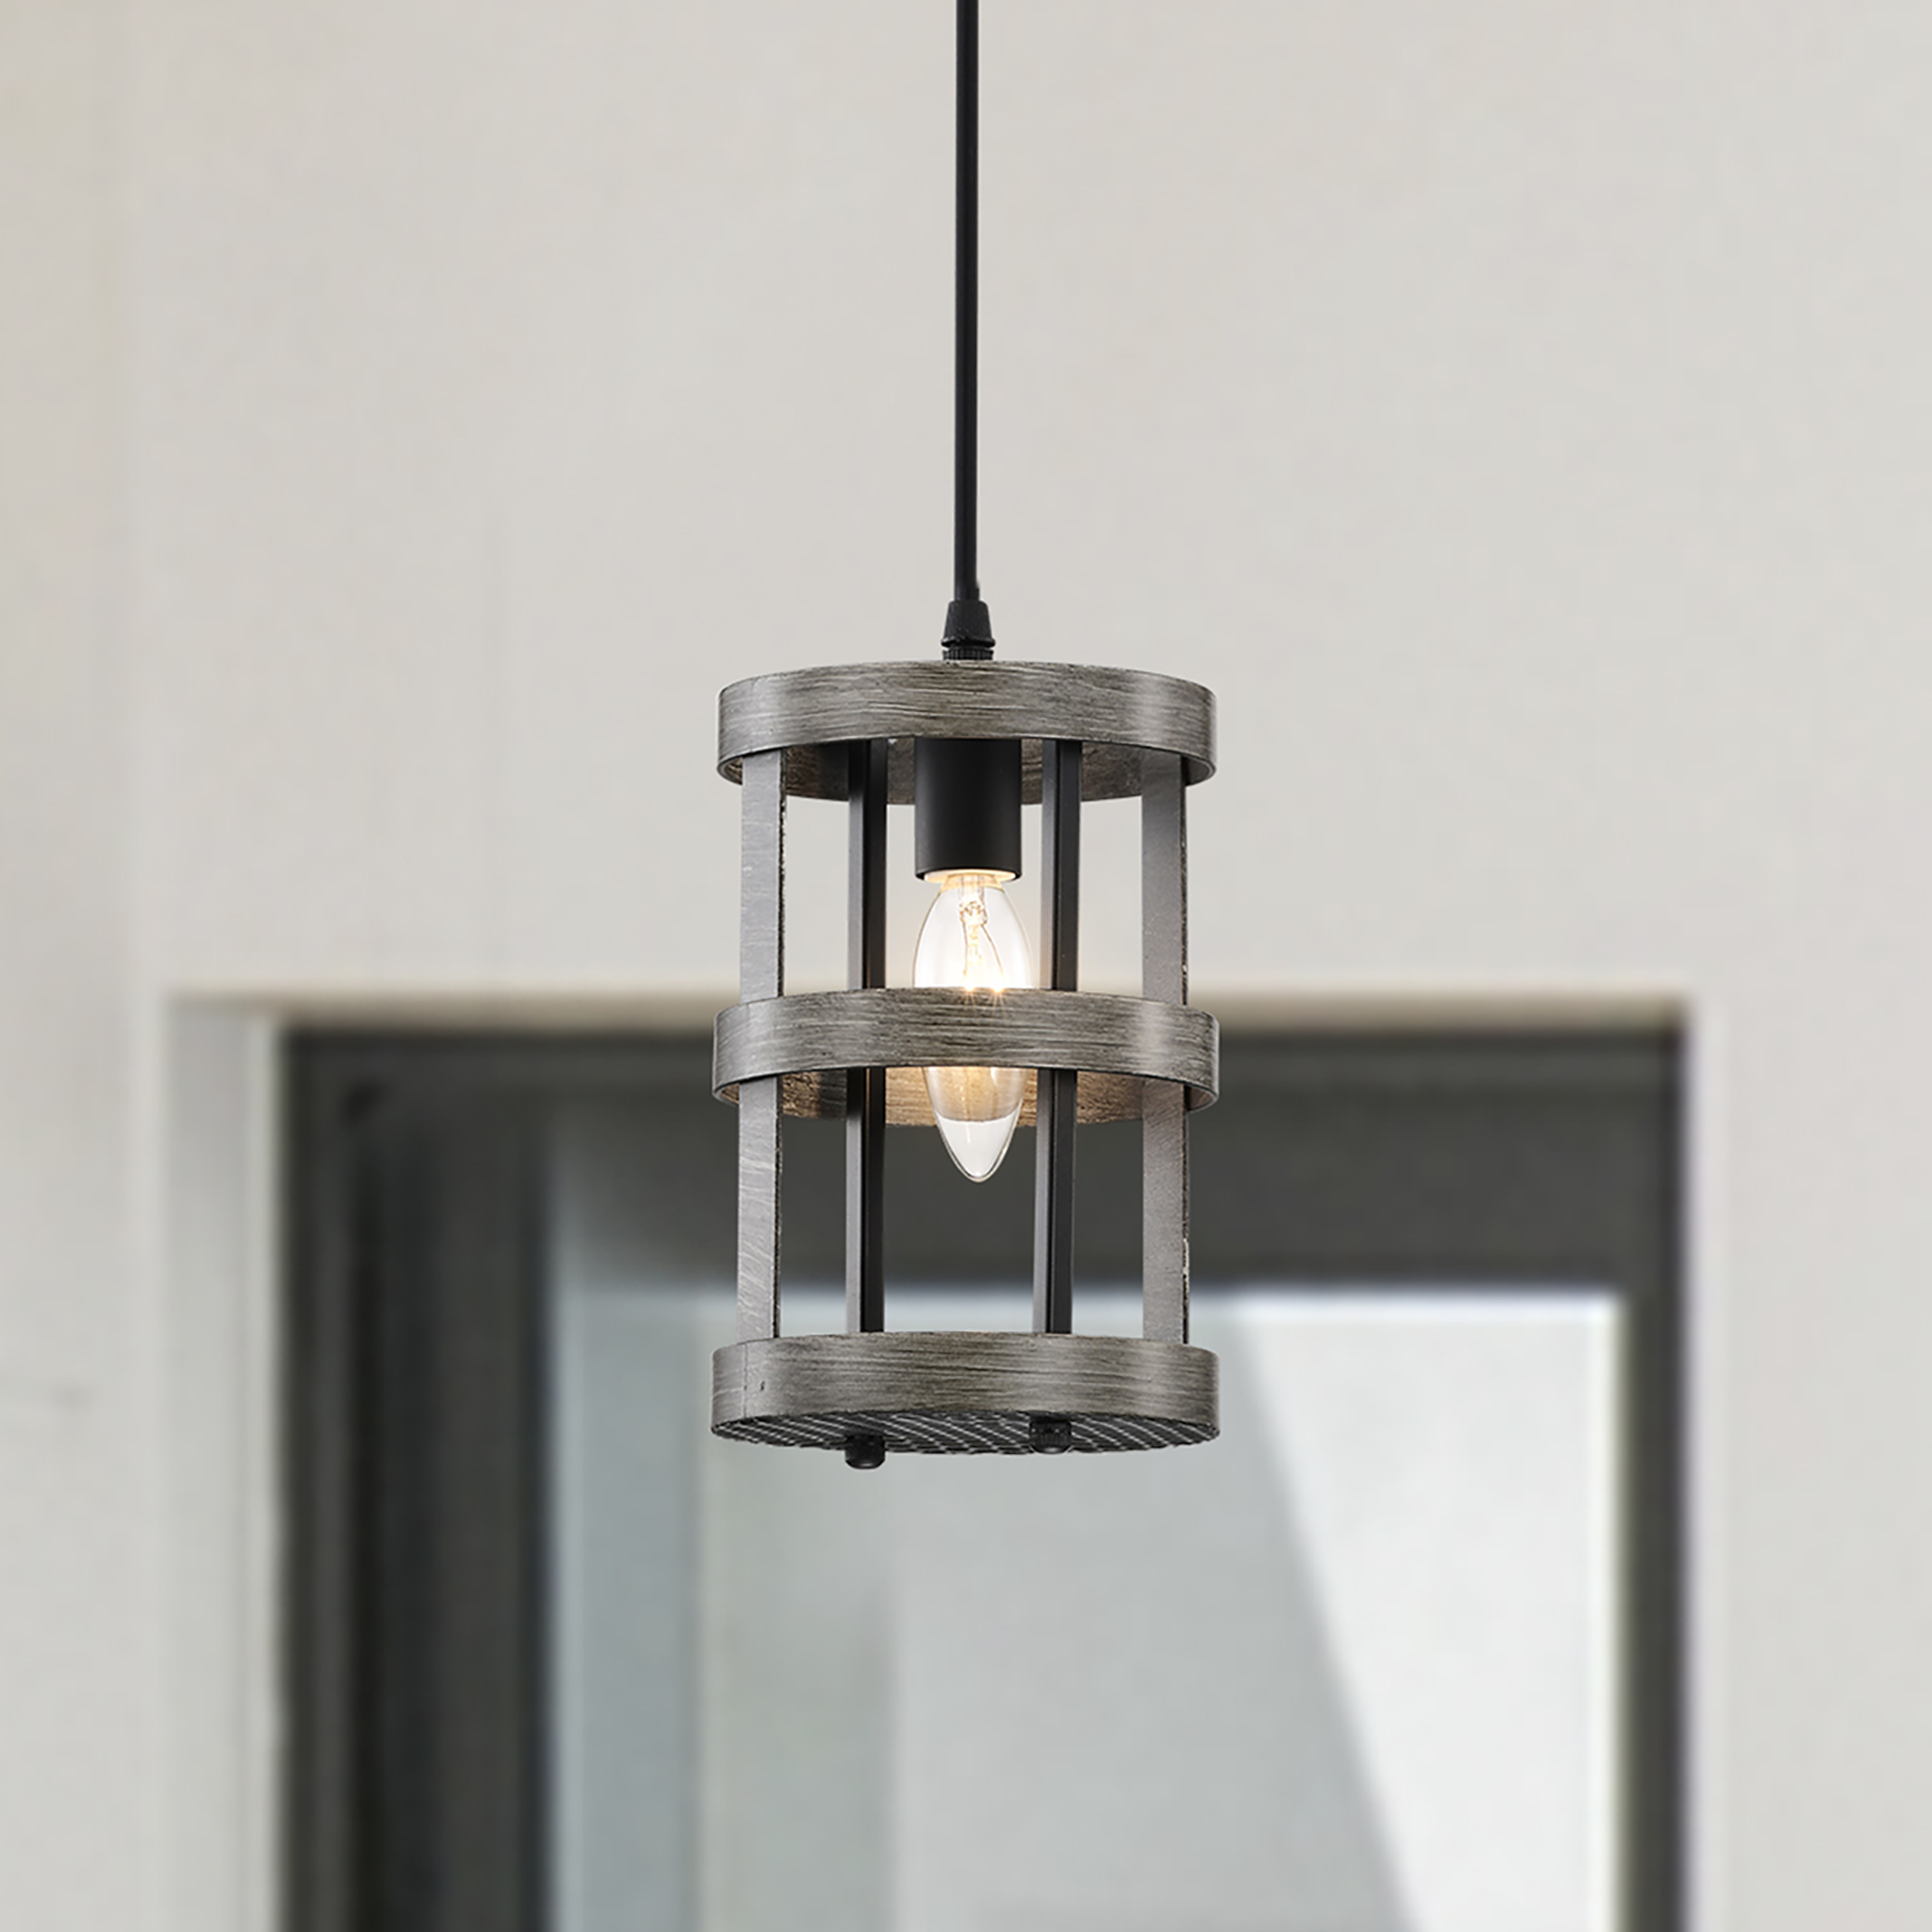 Dania 5 in. 1-Light Indoor Matte Black and Faux Wood Grain Finish Pendant Light with Light Kit